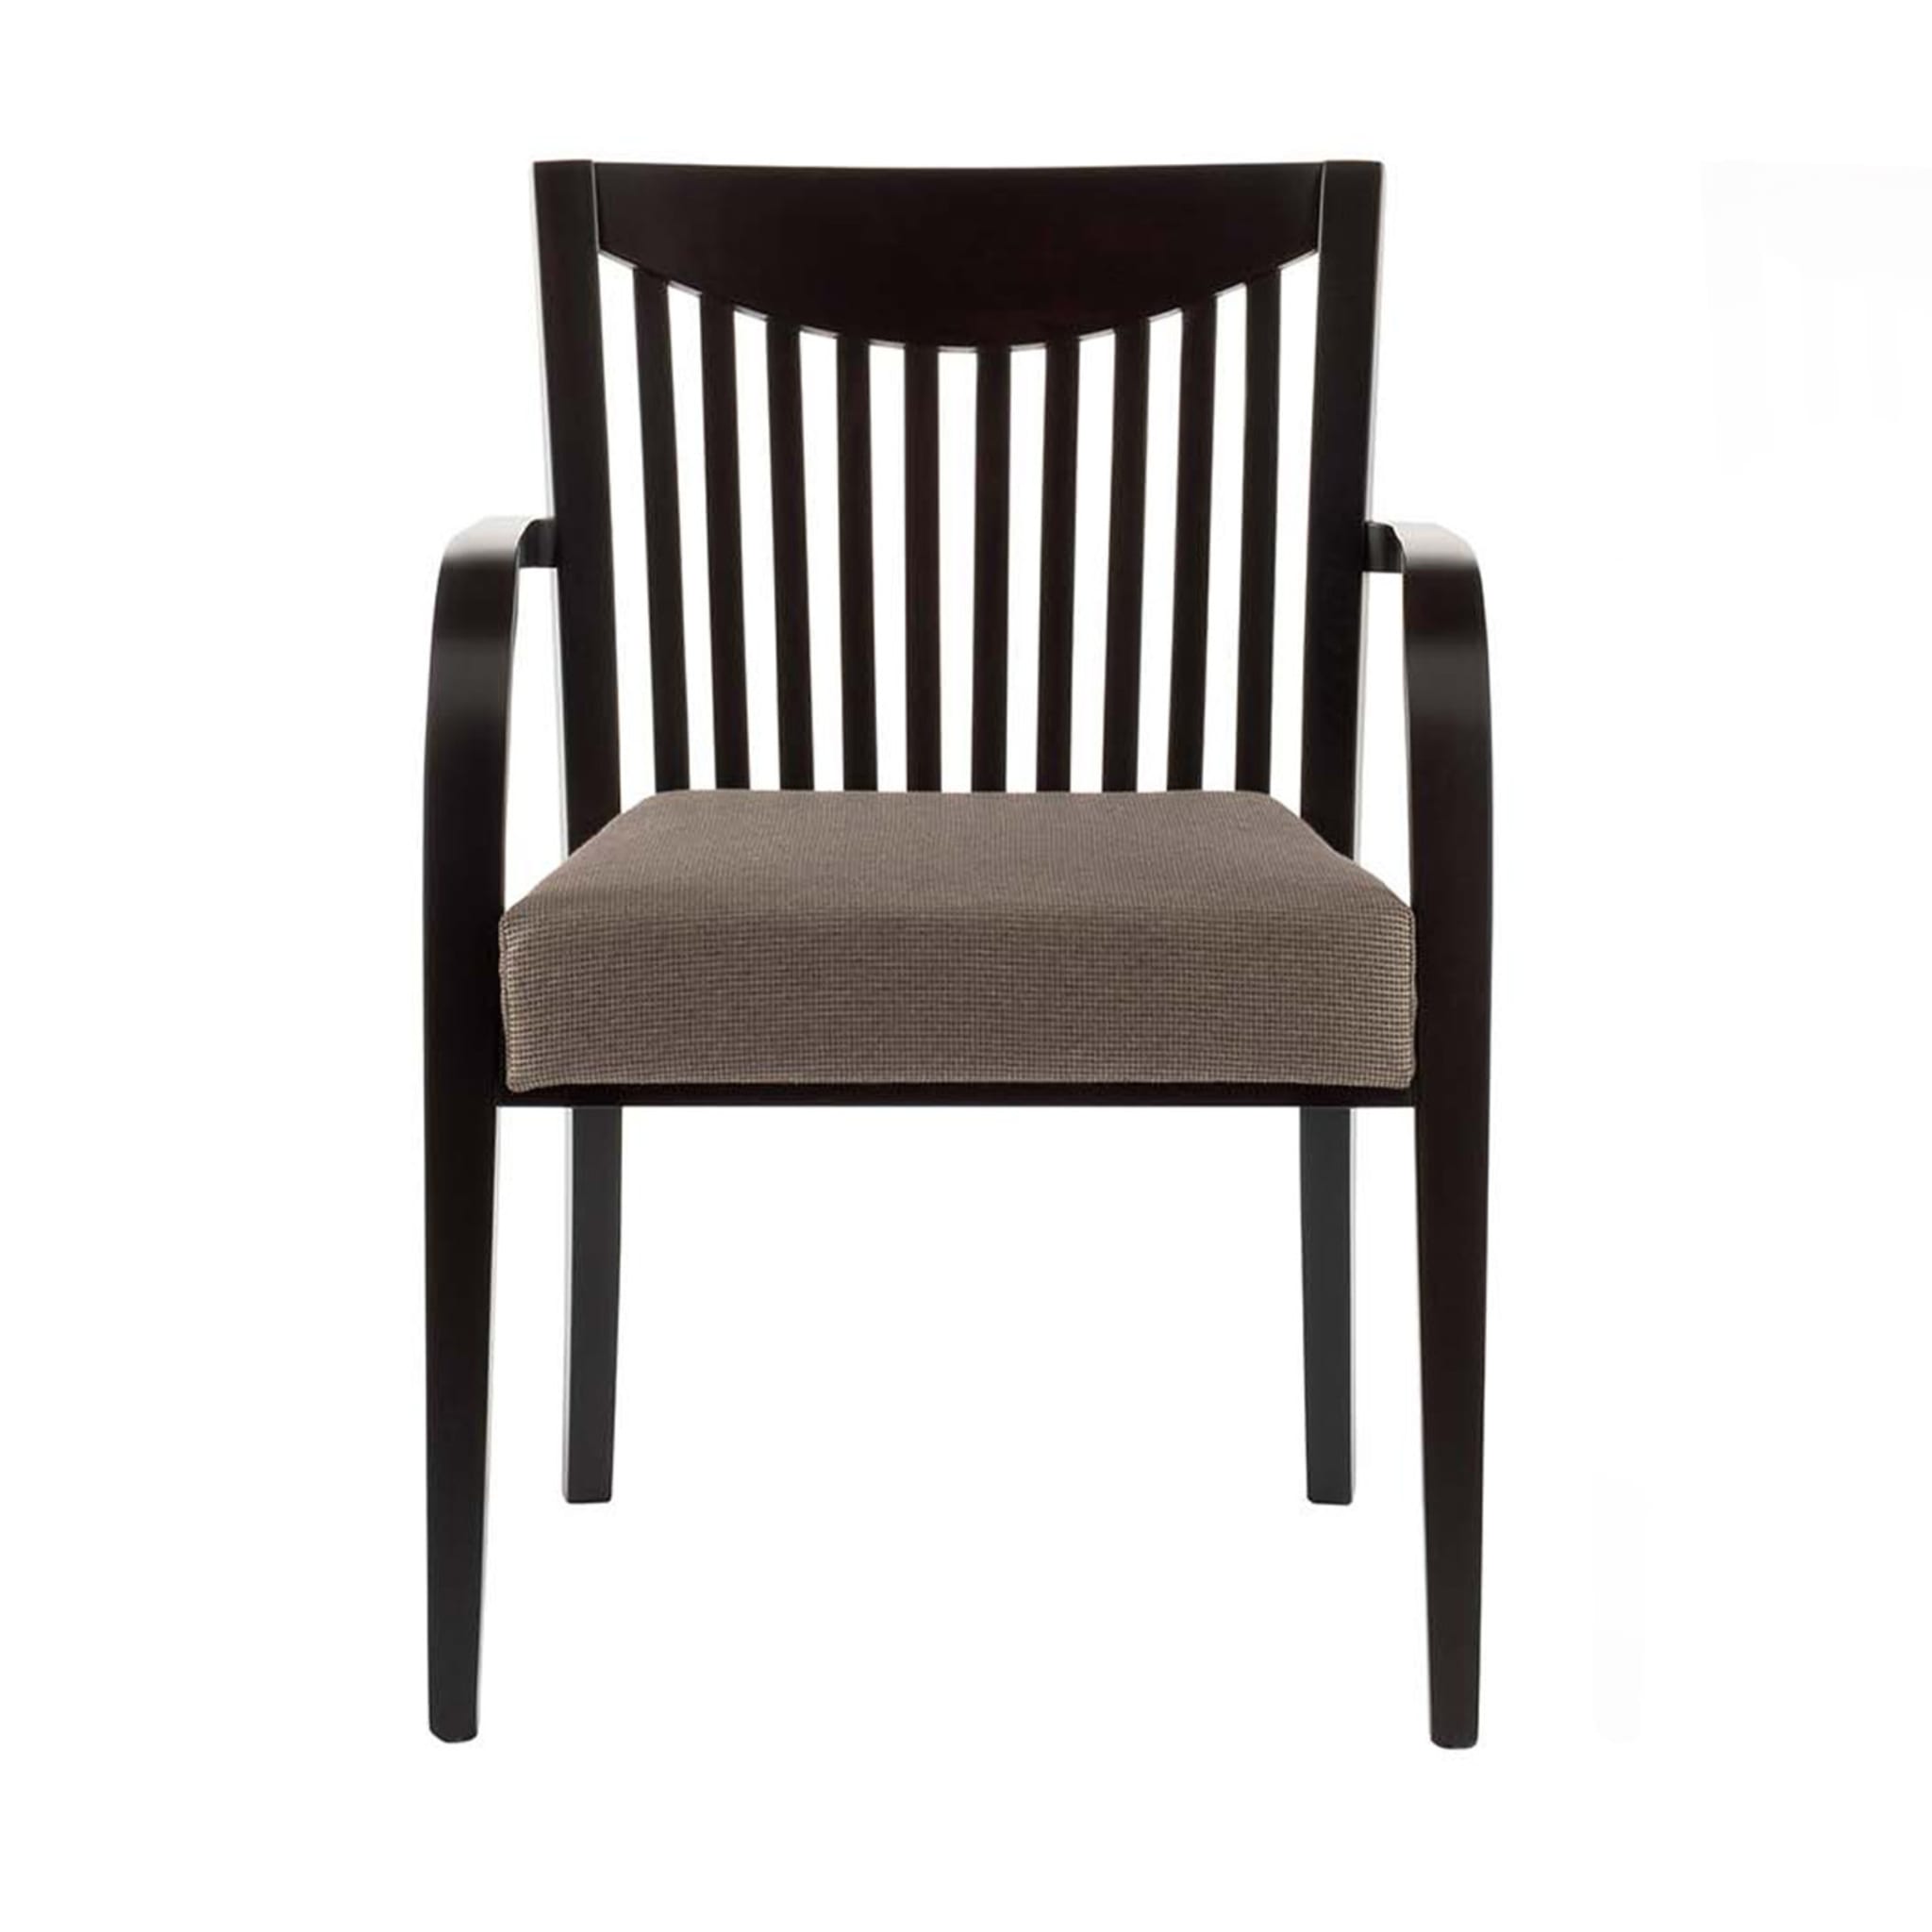 Diva-1 Dining Chair - Main view